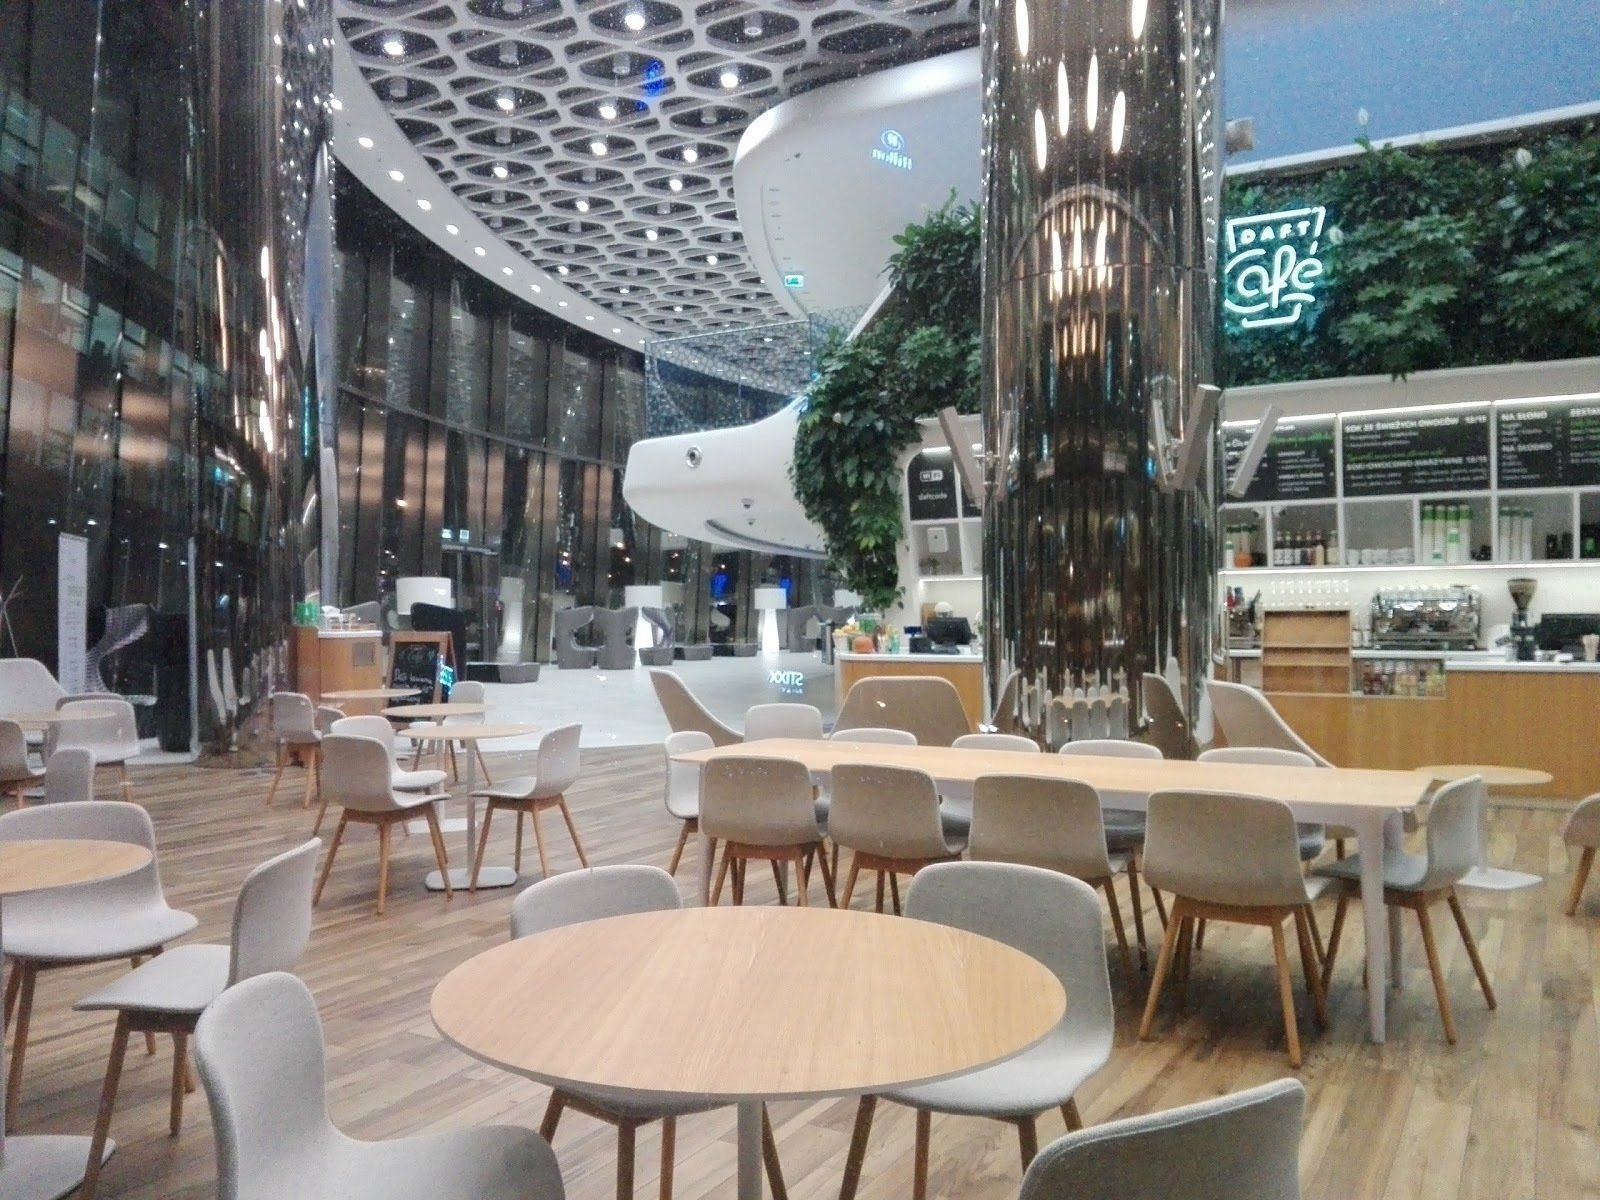 <span class="translation_missing" title="translation missing: en.meta.location_title, location_name: DaftCafe, city: Warsaw">Location Title</span>